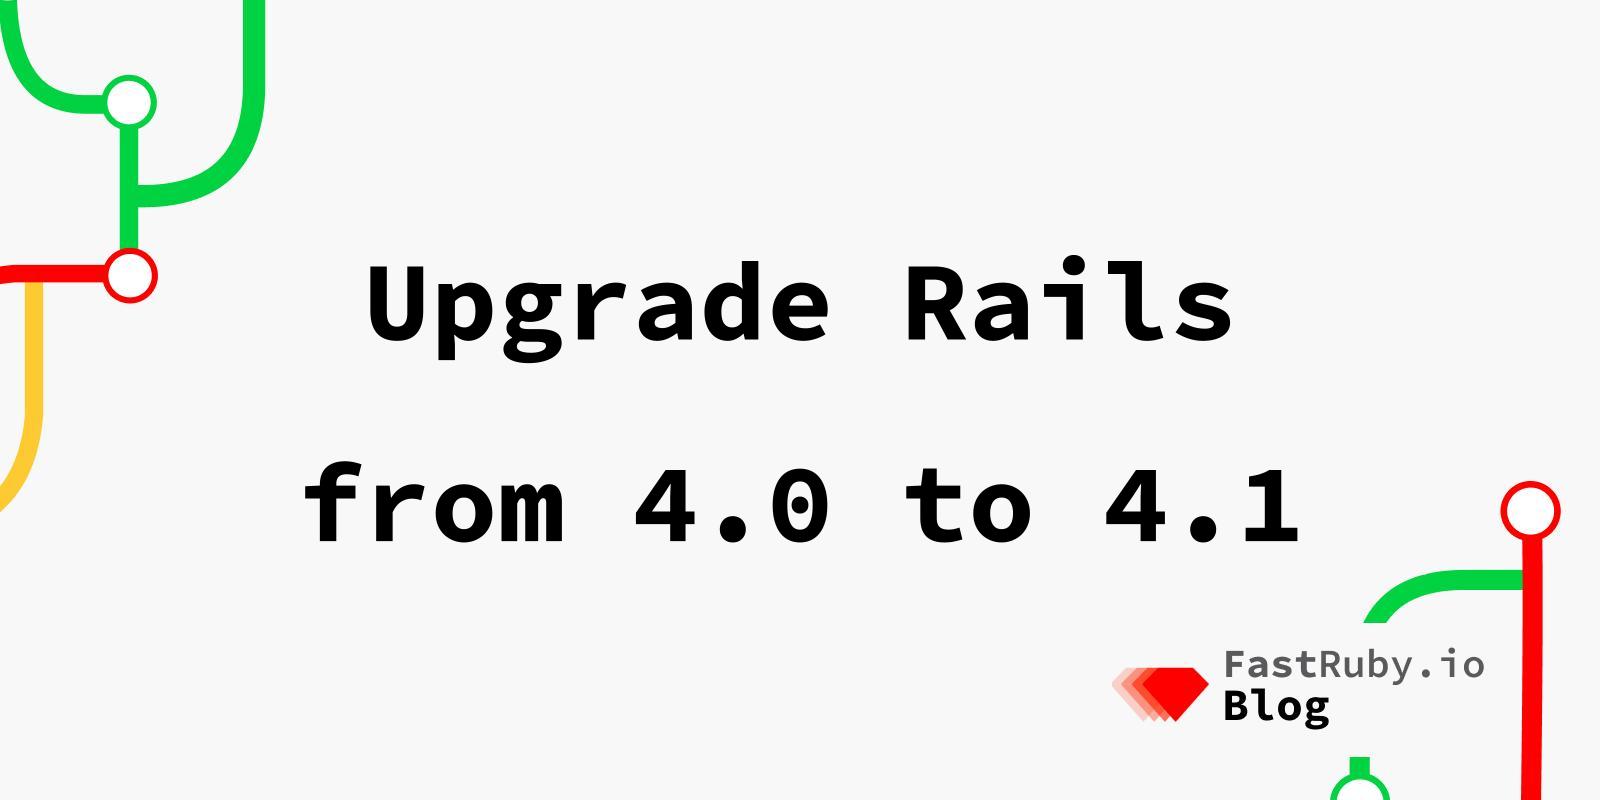 Upgrade Rails from 4.0 to 4.1